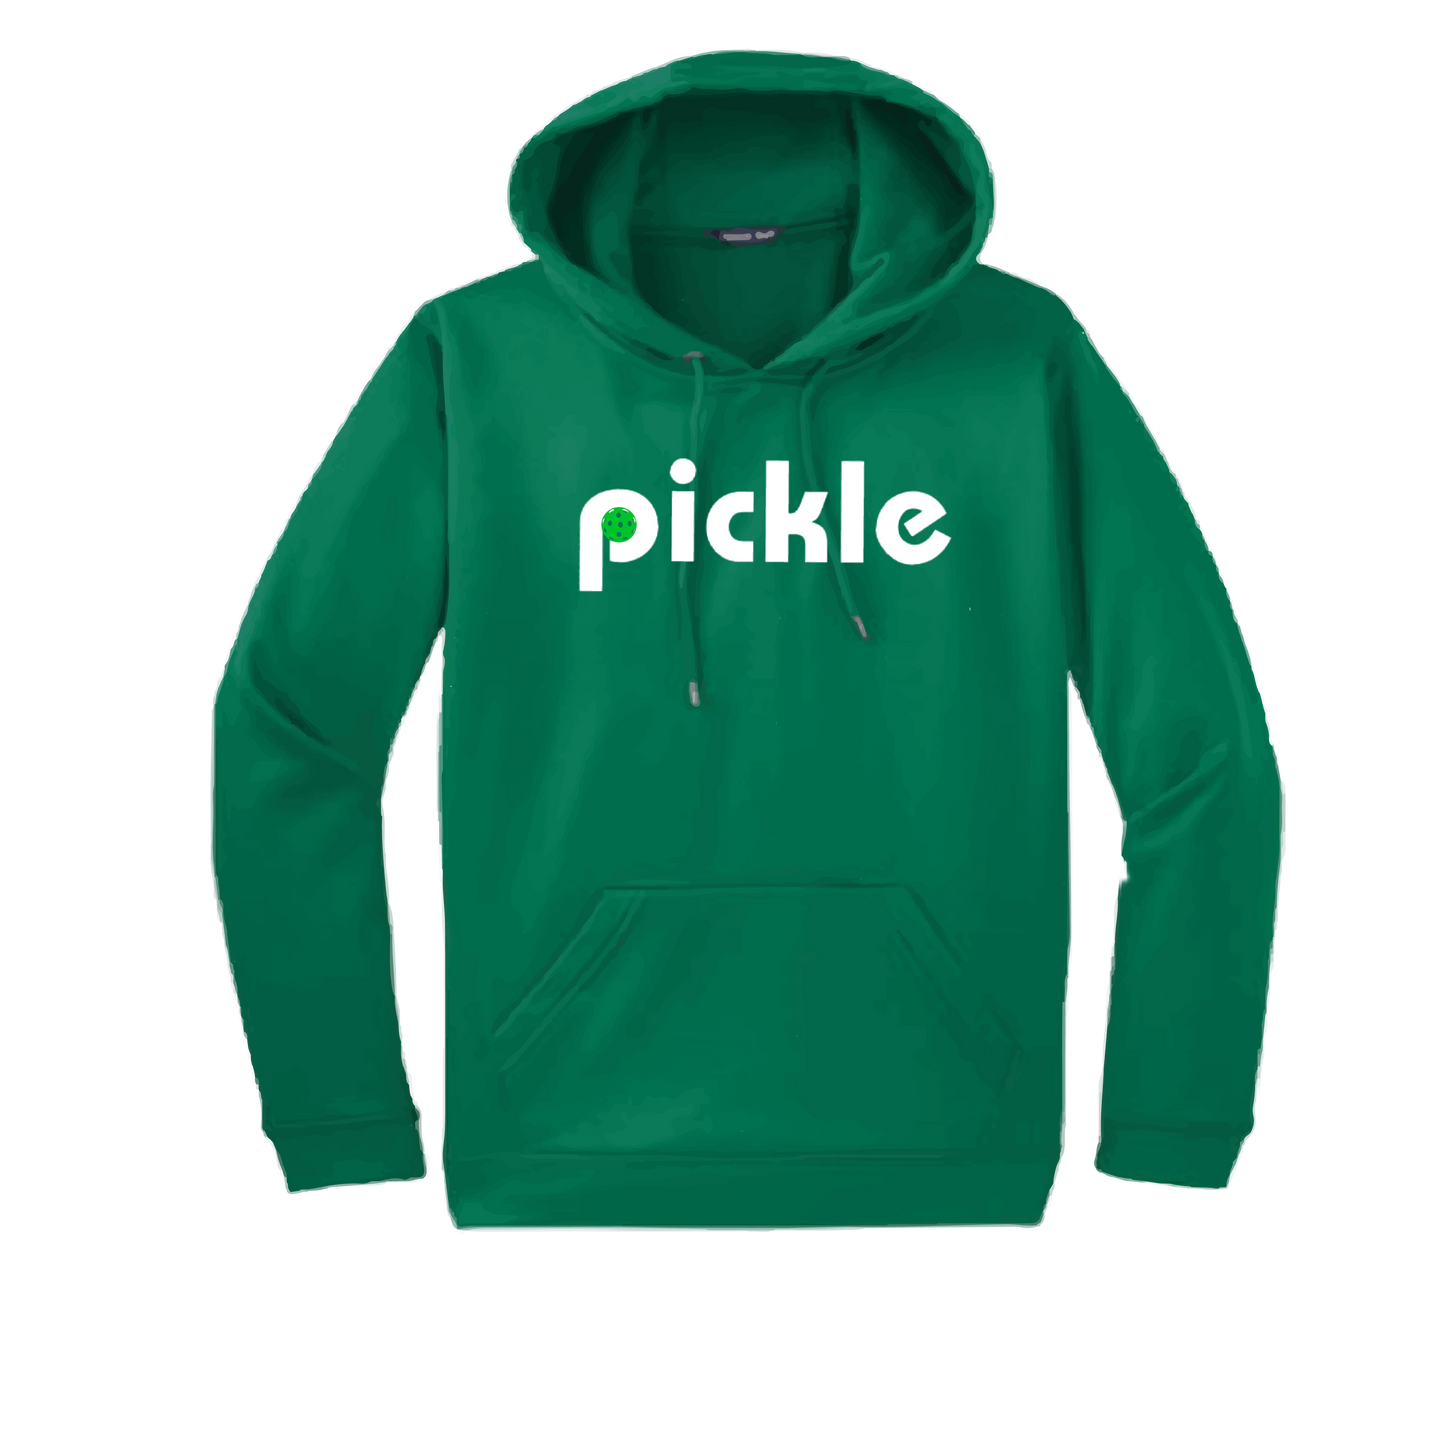 Cozy up for Pickleball in ultra soft comfort! Featuring a moisture-wicking hood, double-lining, and front pouch pocket, this unisex hoodie is a stylish and practical way to stay warm on the court. Show off your unique look with this one-of-a-kind design!